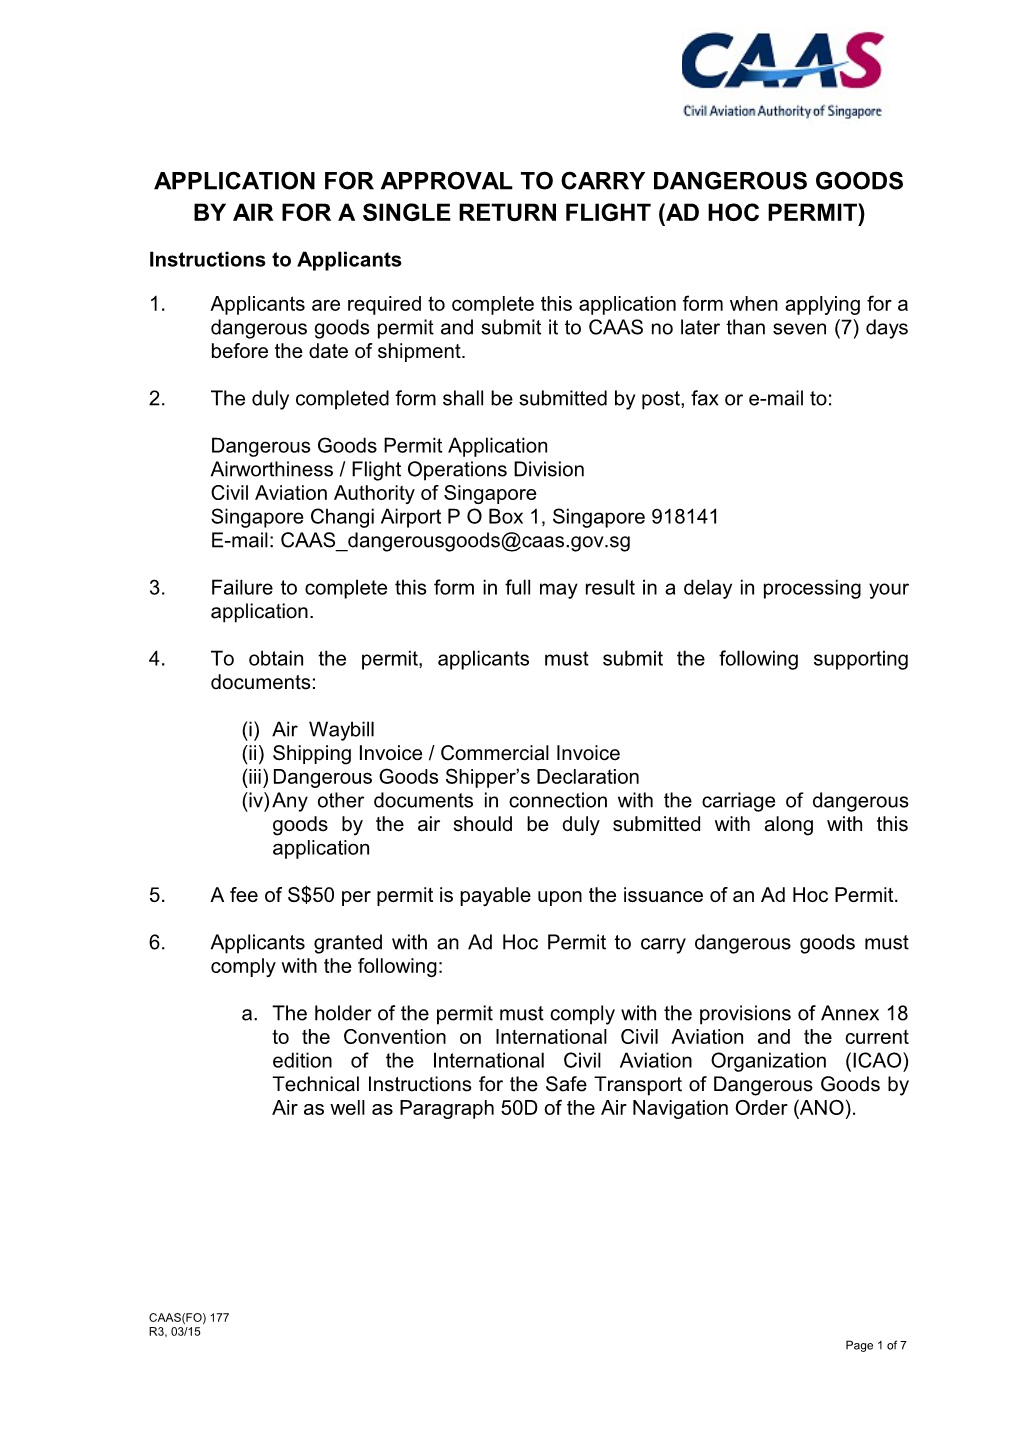 Application for Approval to Carry Dangerous Goods by Air for a Single Return Flight (Adhoc